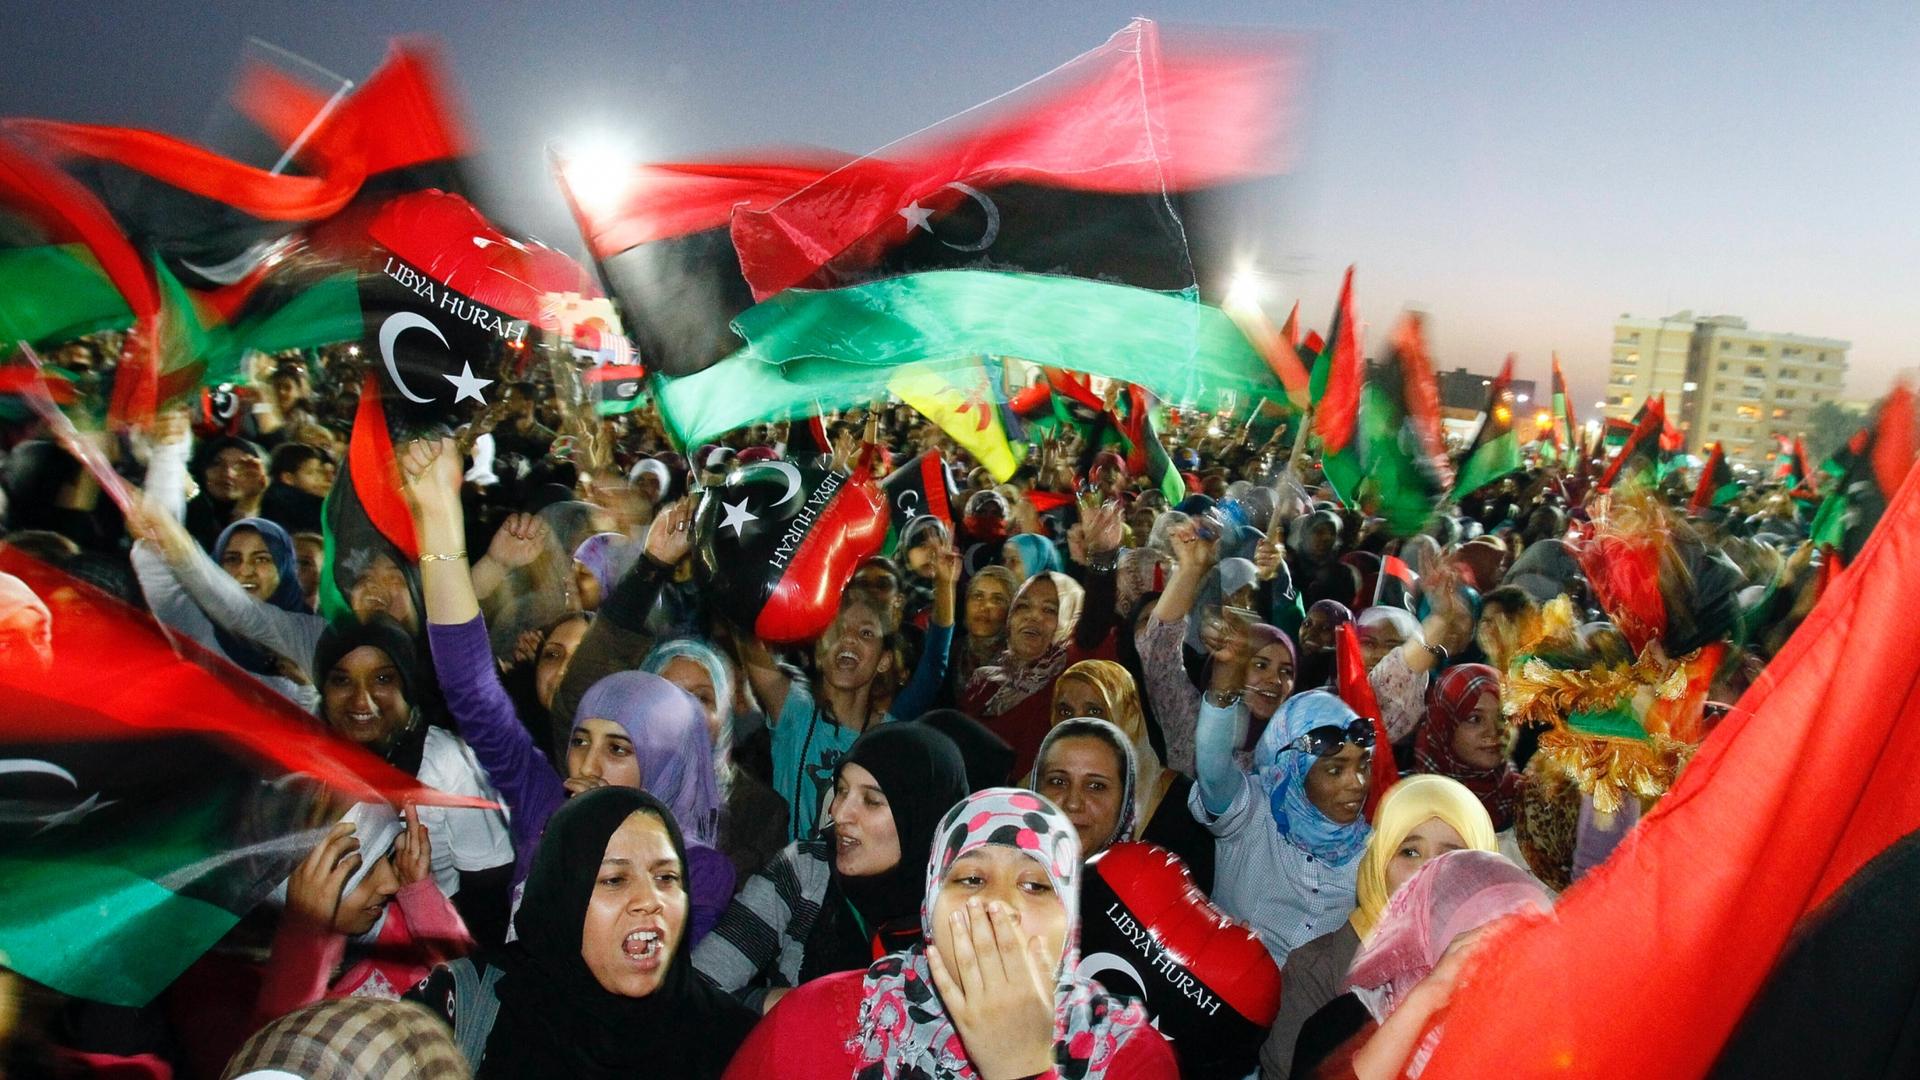 A crowd of people celebrate with flashes of red, black and green flags waving in the air. 